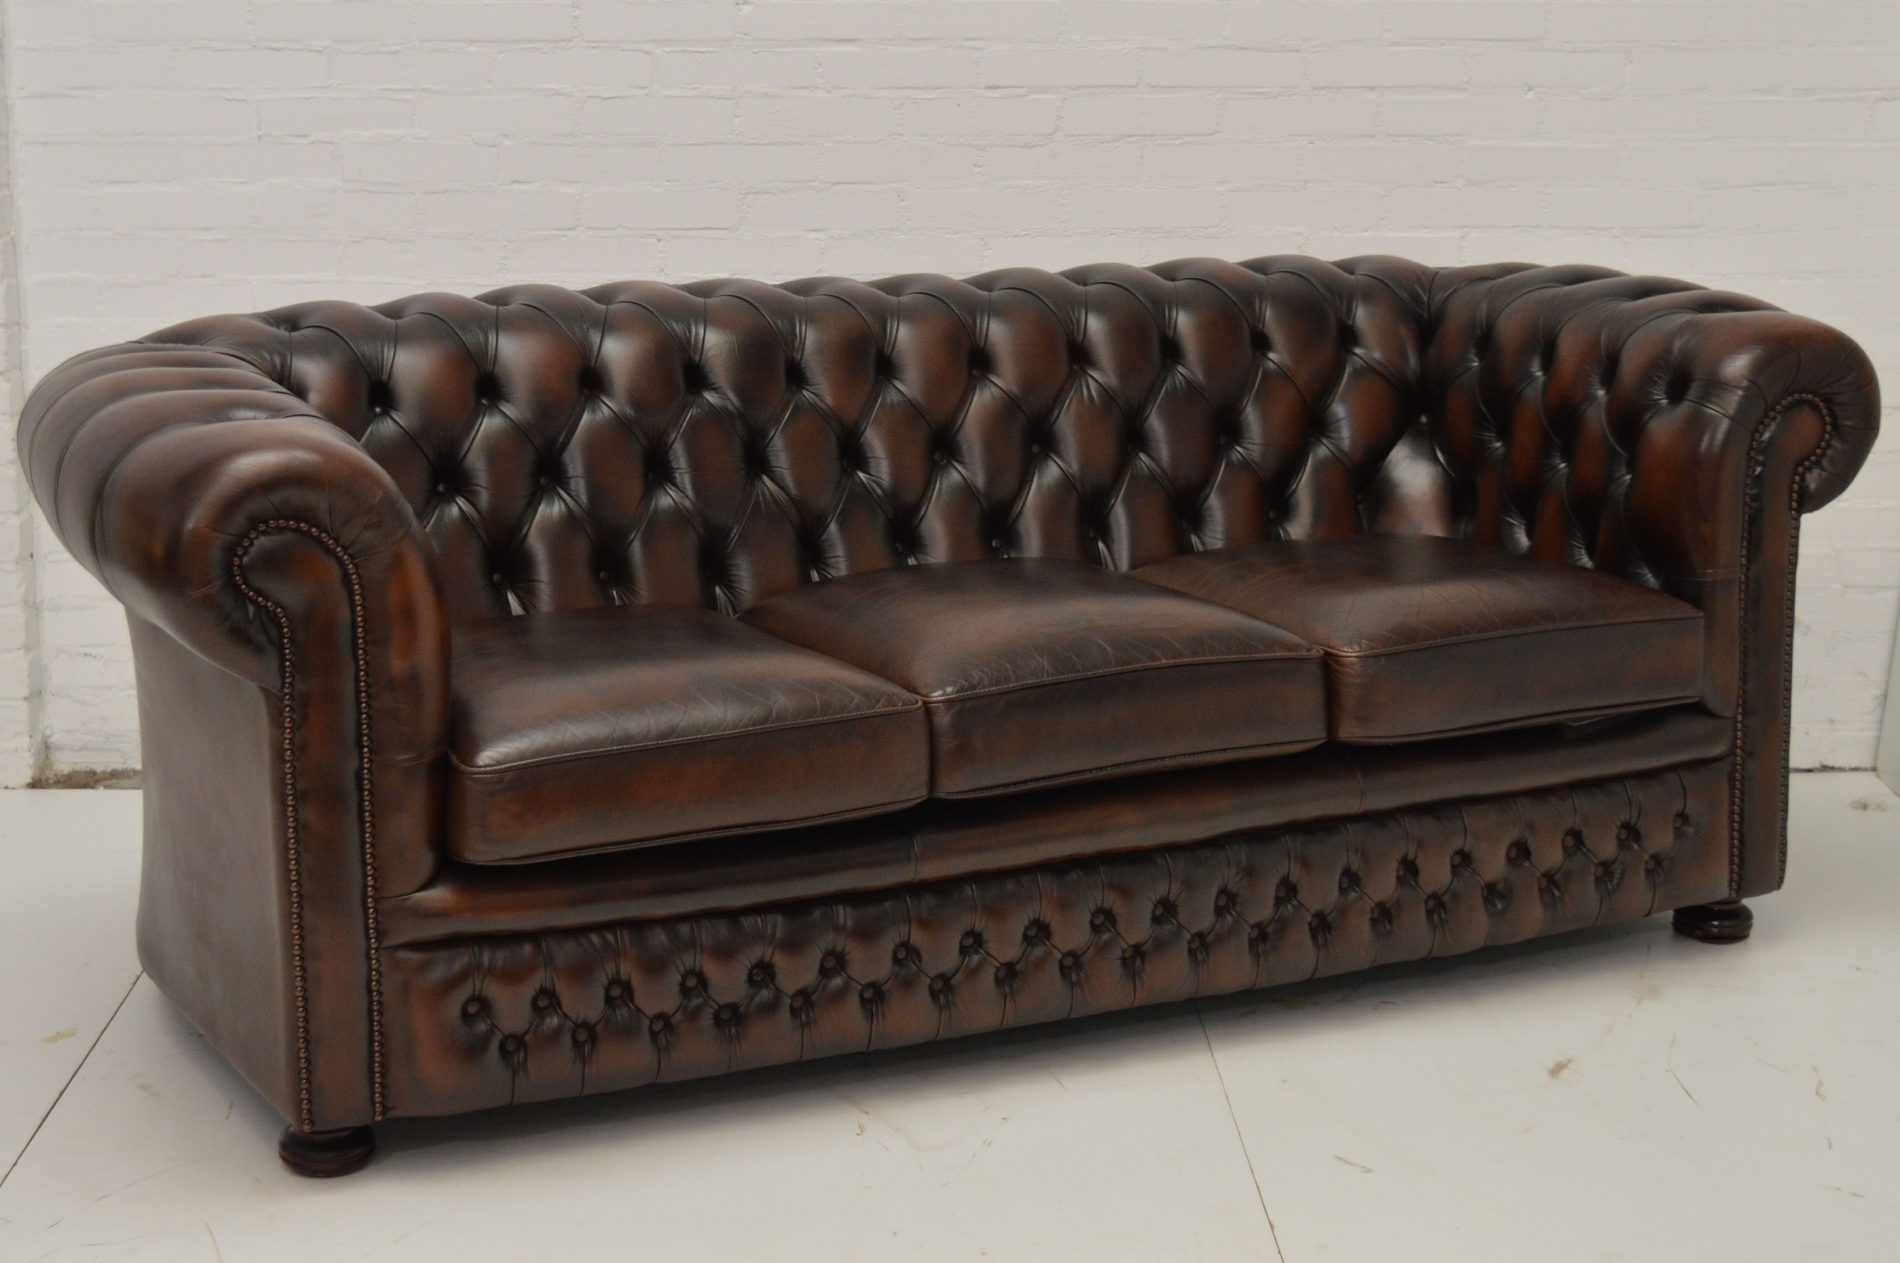 Traditionele drie zits chesterfield bank.